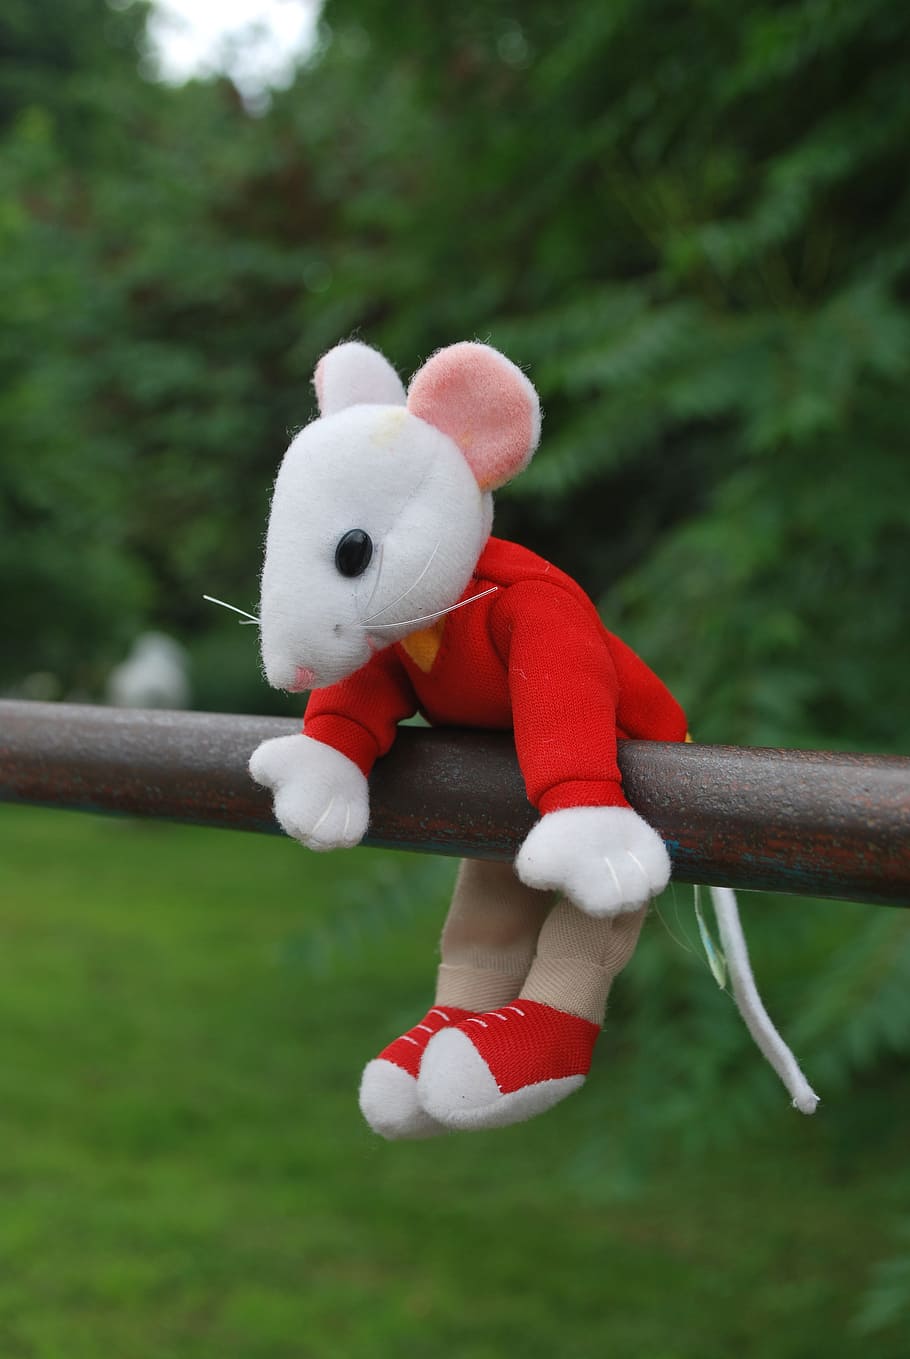 mouse, toy, hanging, outside, nature, stuart, little, representation, stuffed toy, red